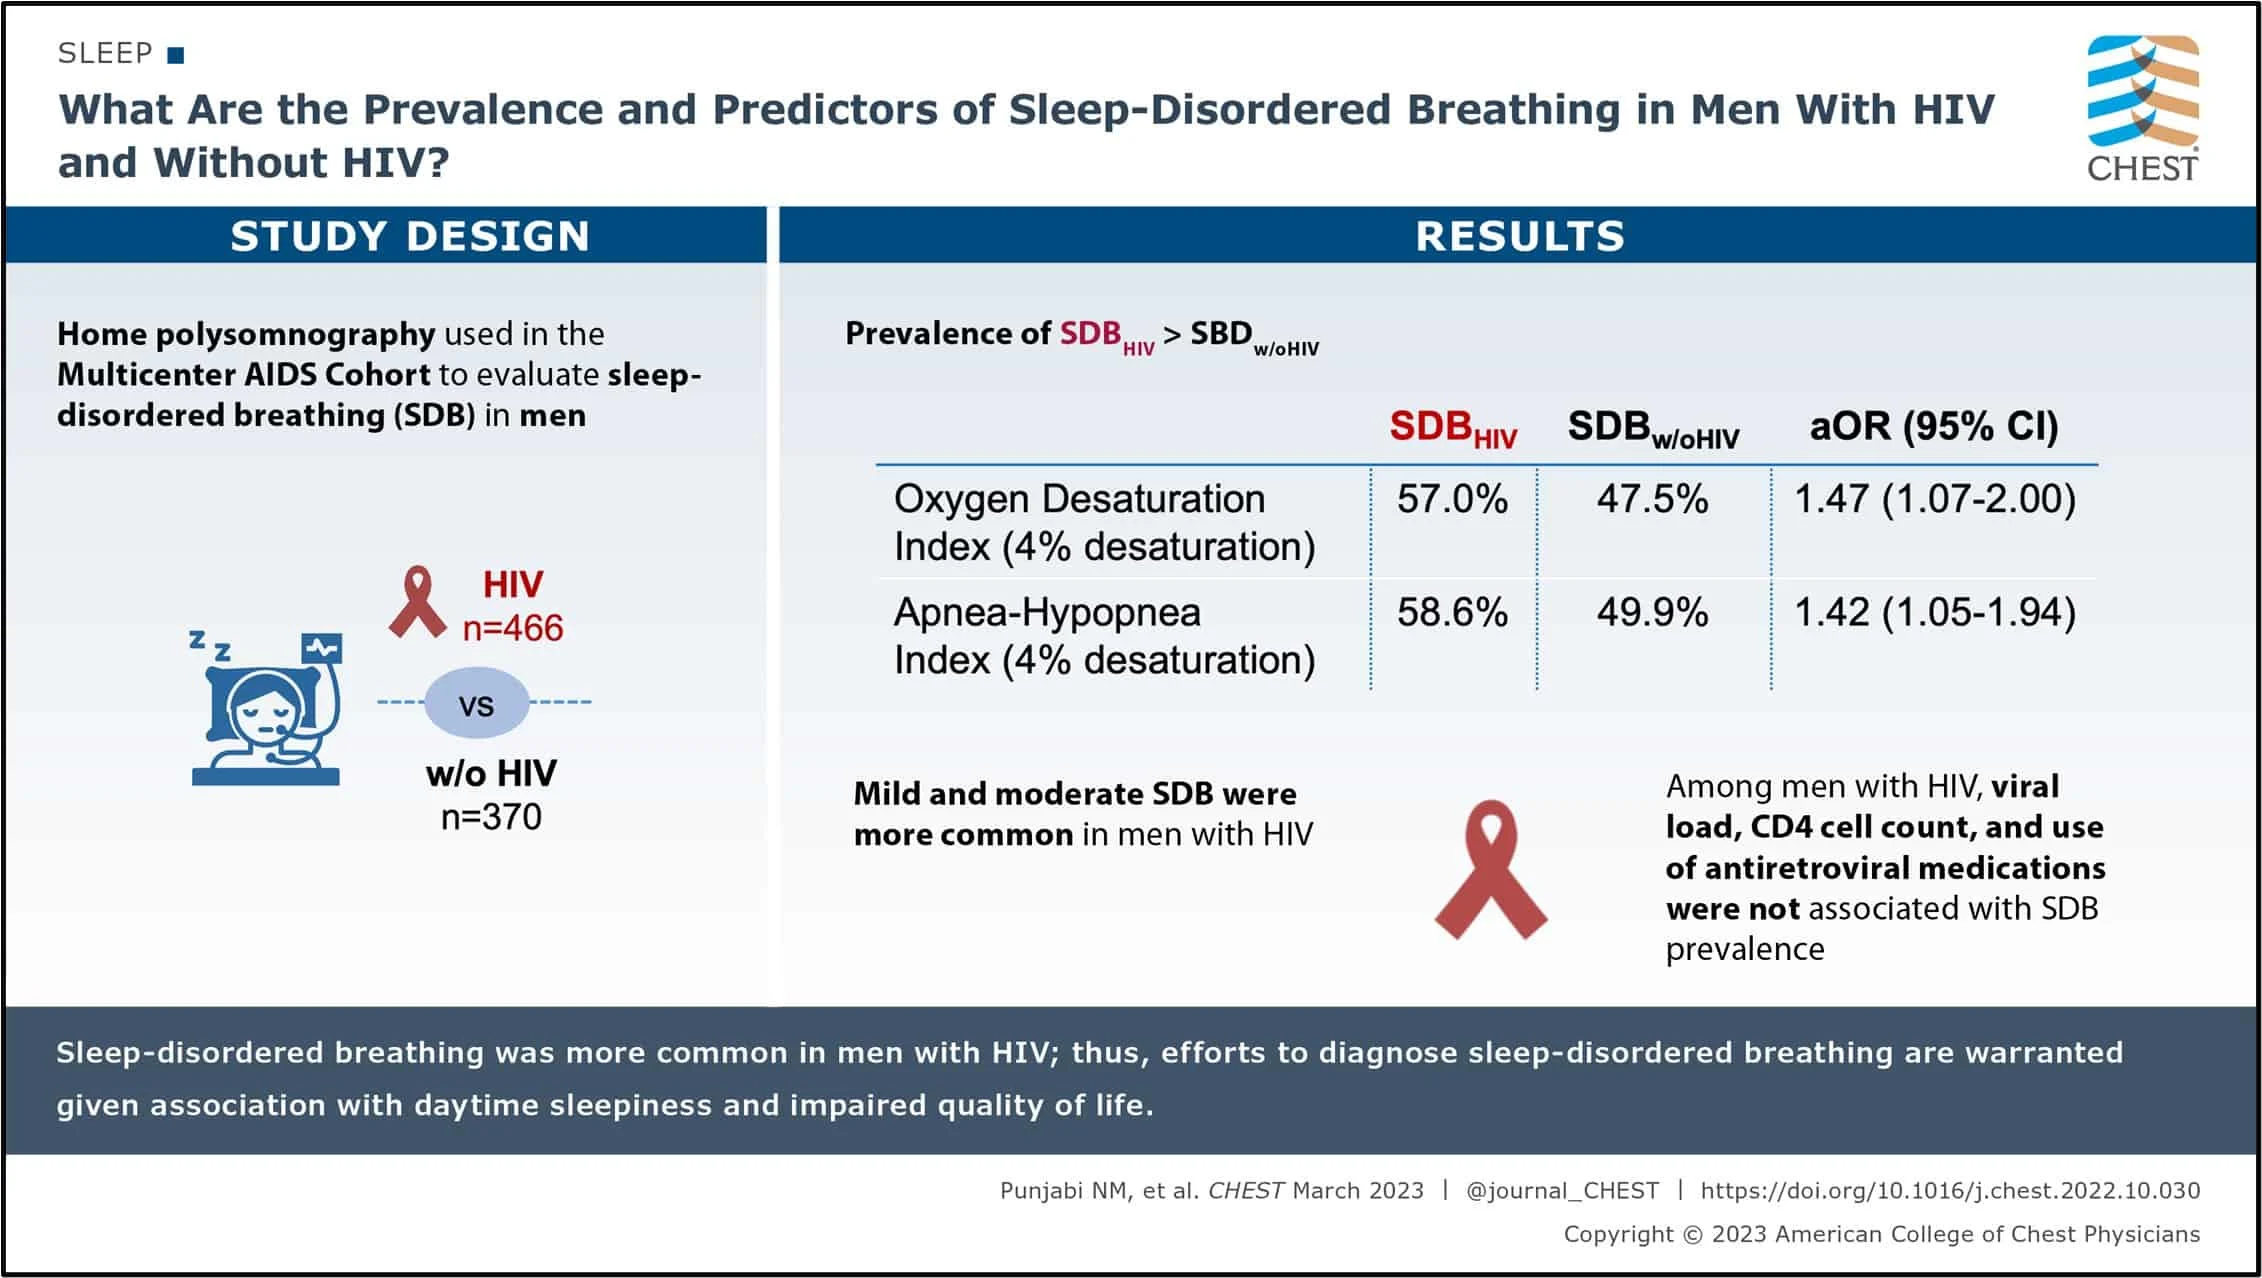 What Are the Prevalence and Predictors of Sleep-Disordered Breathing in Men With HIV?